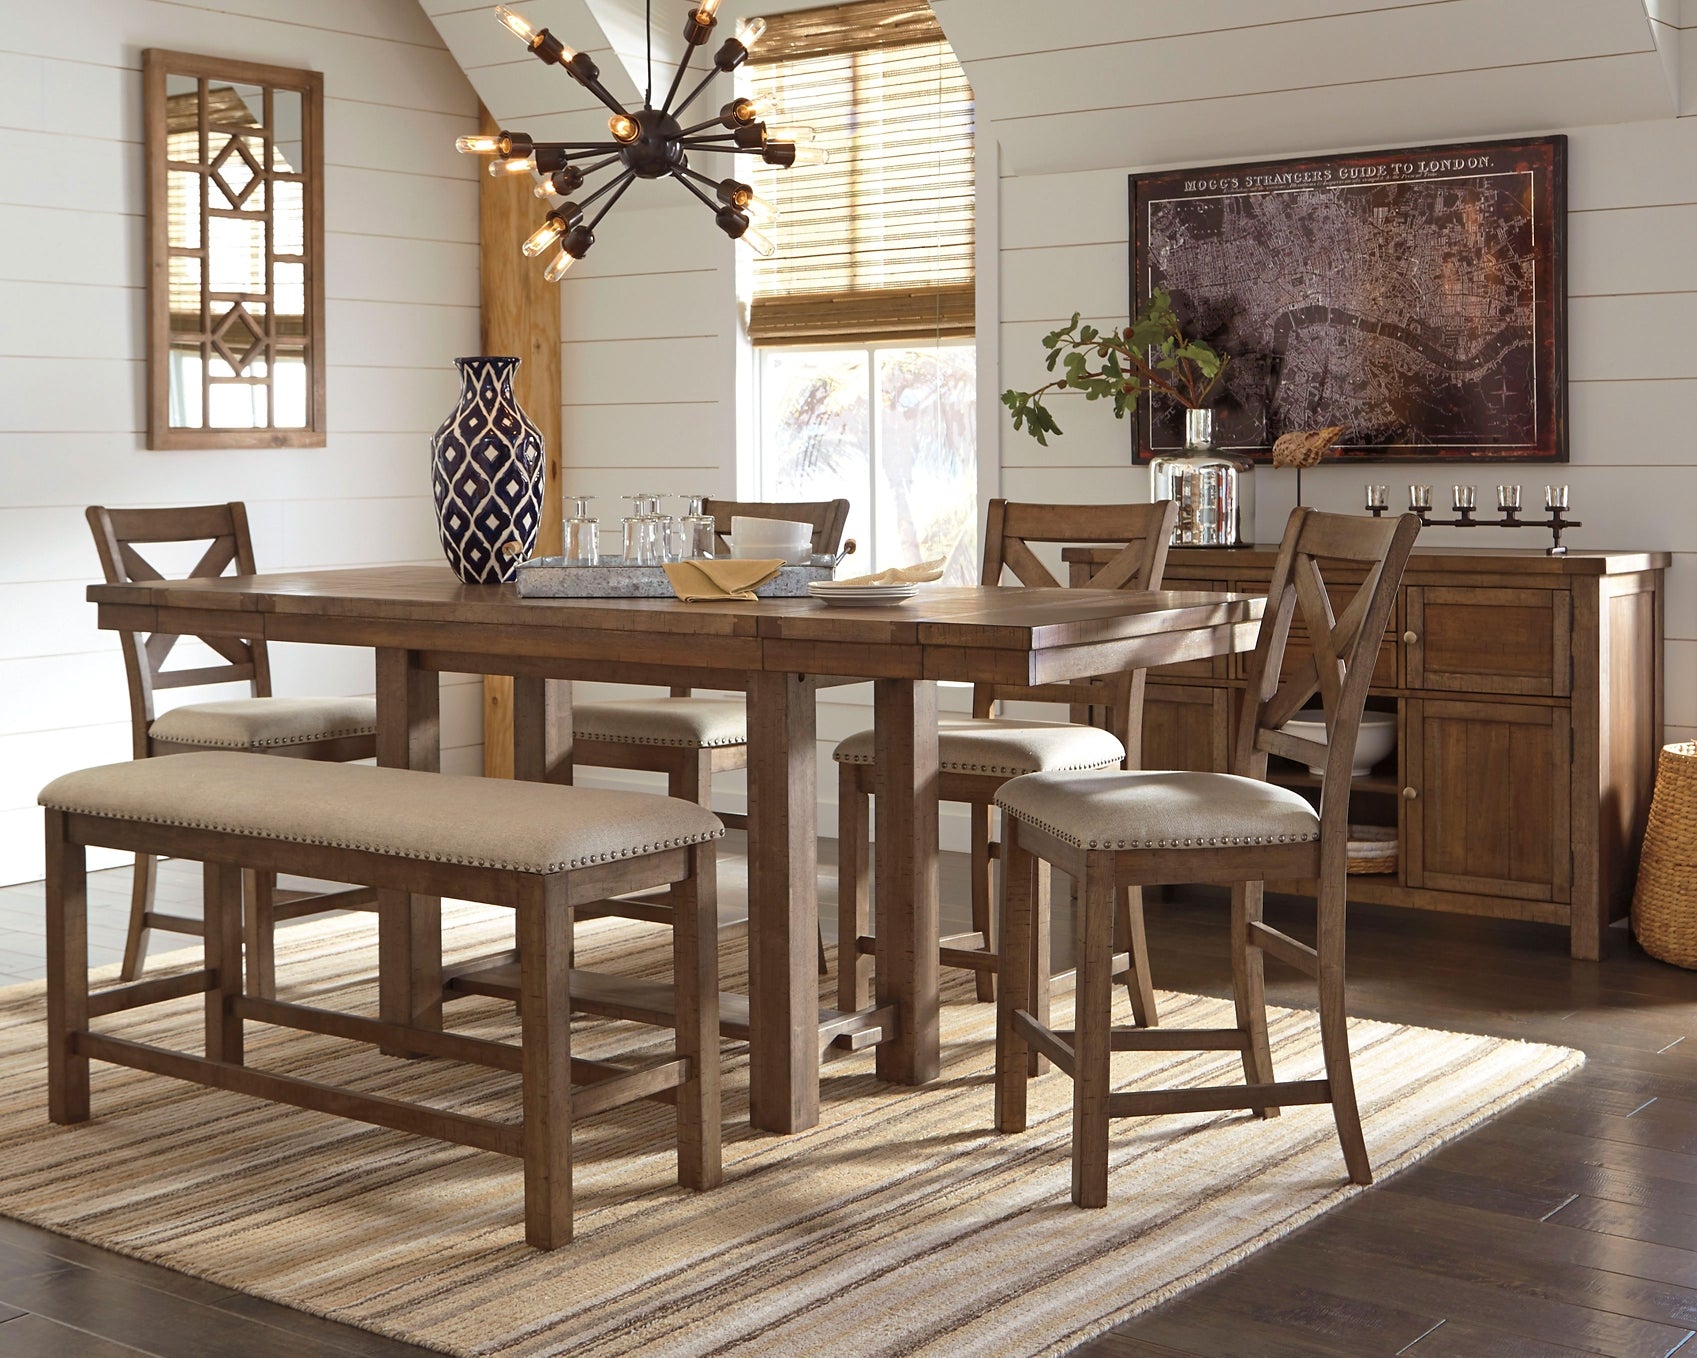 Moriville Counter Height Dining Table and 4 Barstools and Bench with Storage Wilson Furniture (OH)  in Bridgeport, Ohio. Serving Bridgeport, Yorkville, Bellaire, & Avondale